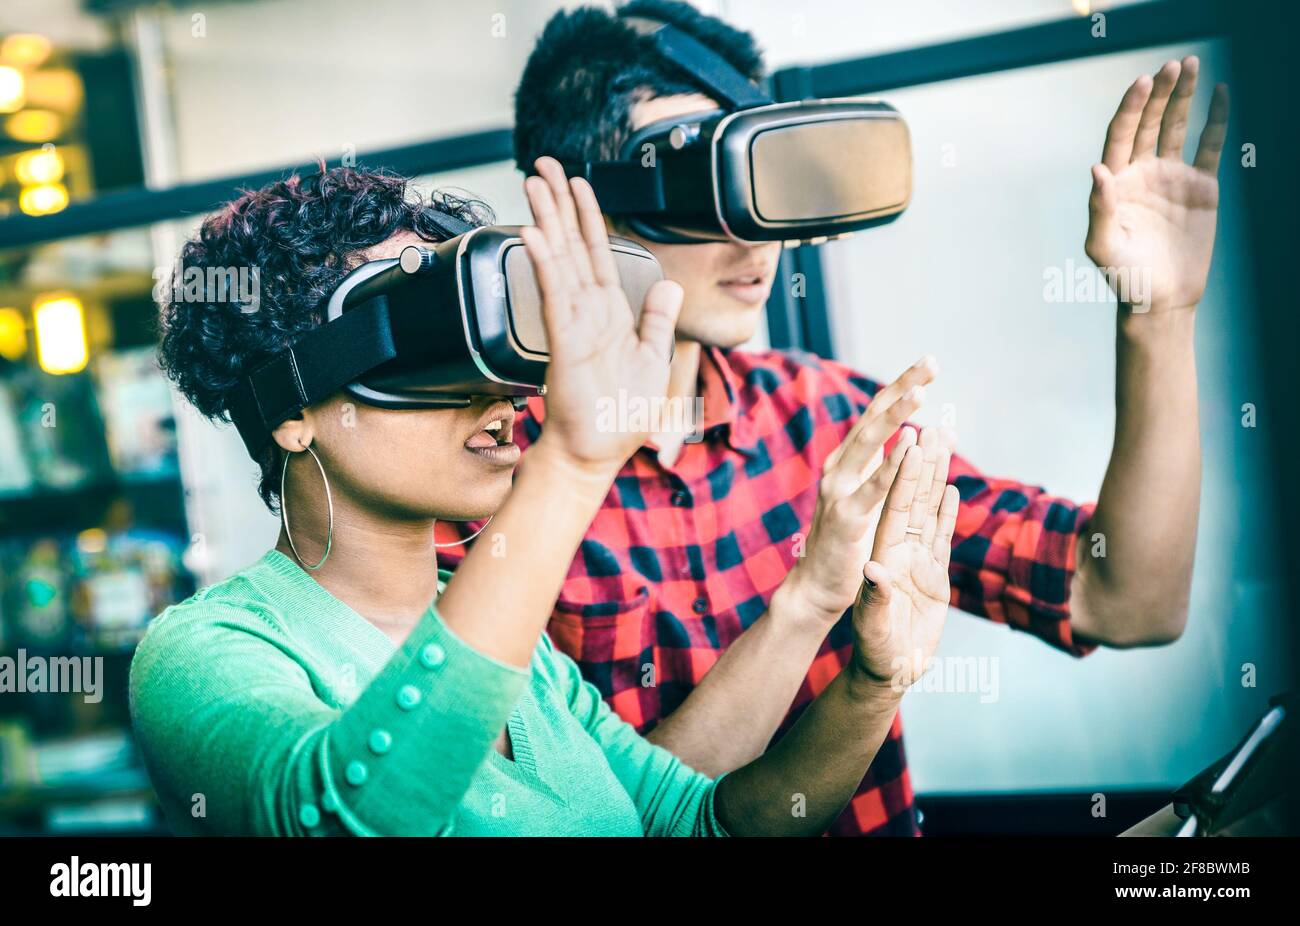 Multiracial couple in love going beyond racial diversity through virtual reality glasses - Young people having fun using new technology Stock Photo